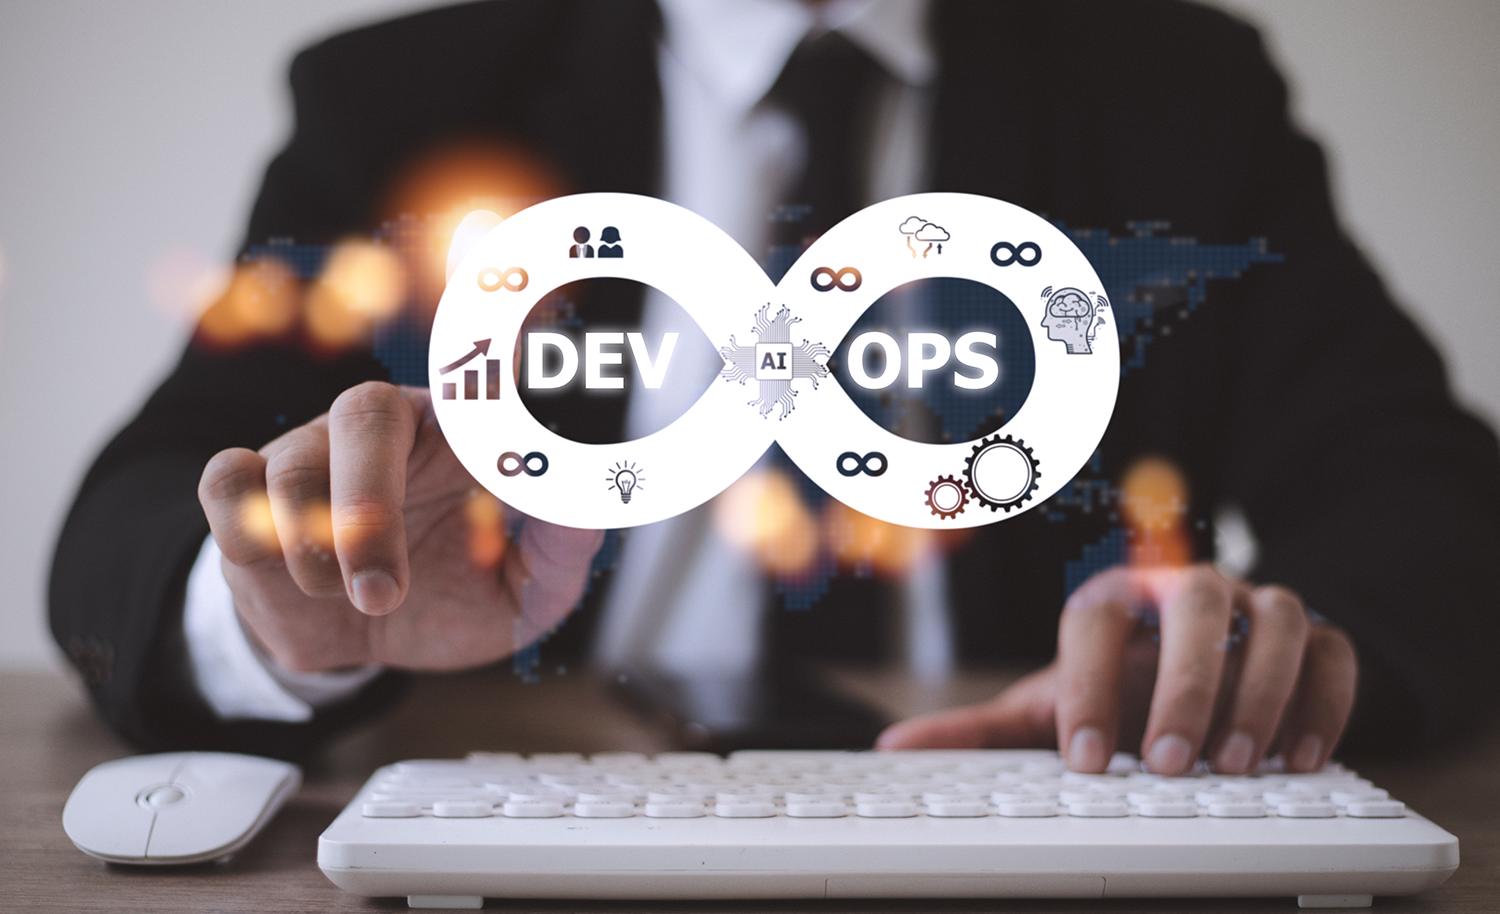 How does DevOps help in improving the Software Development Lifecycle?